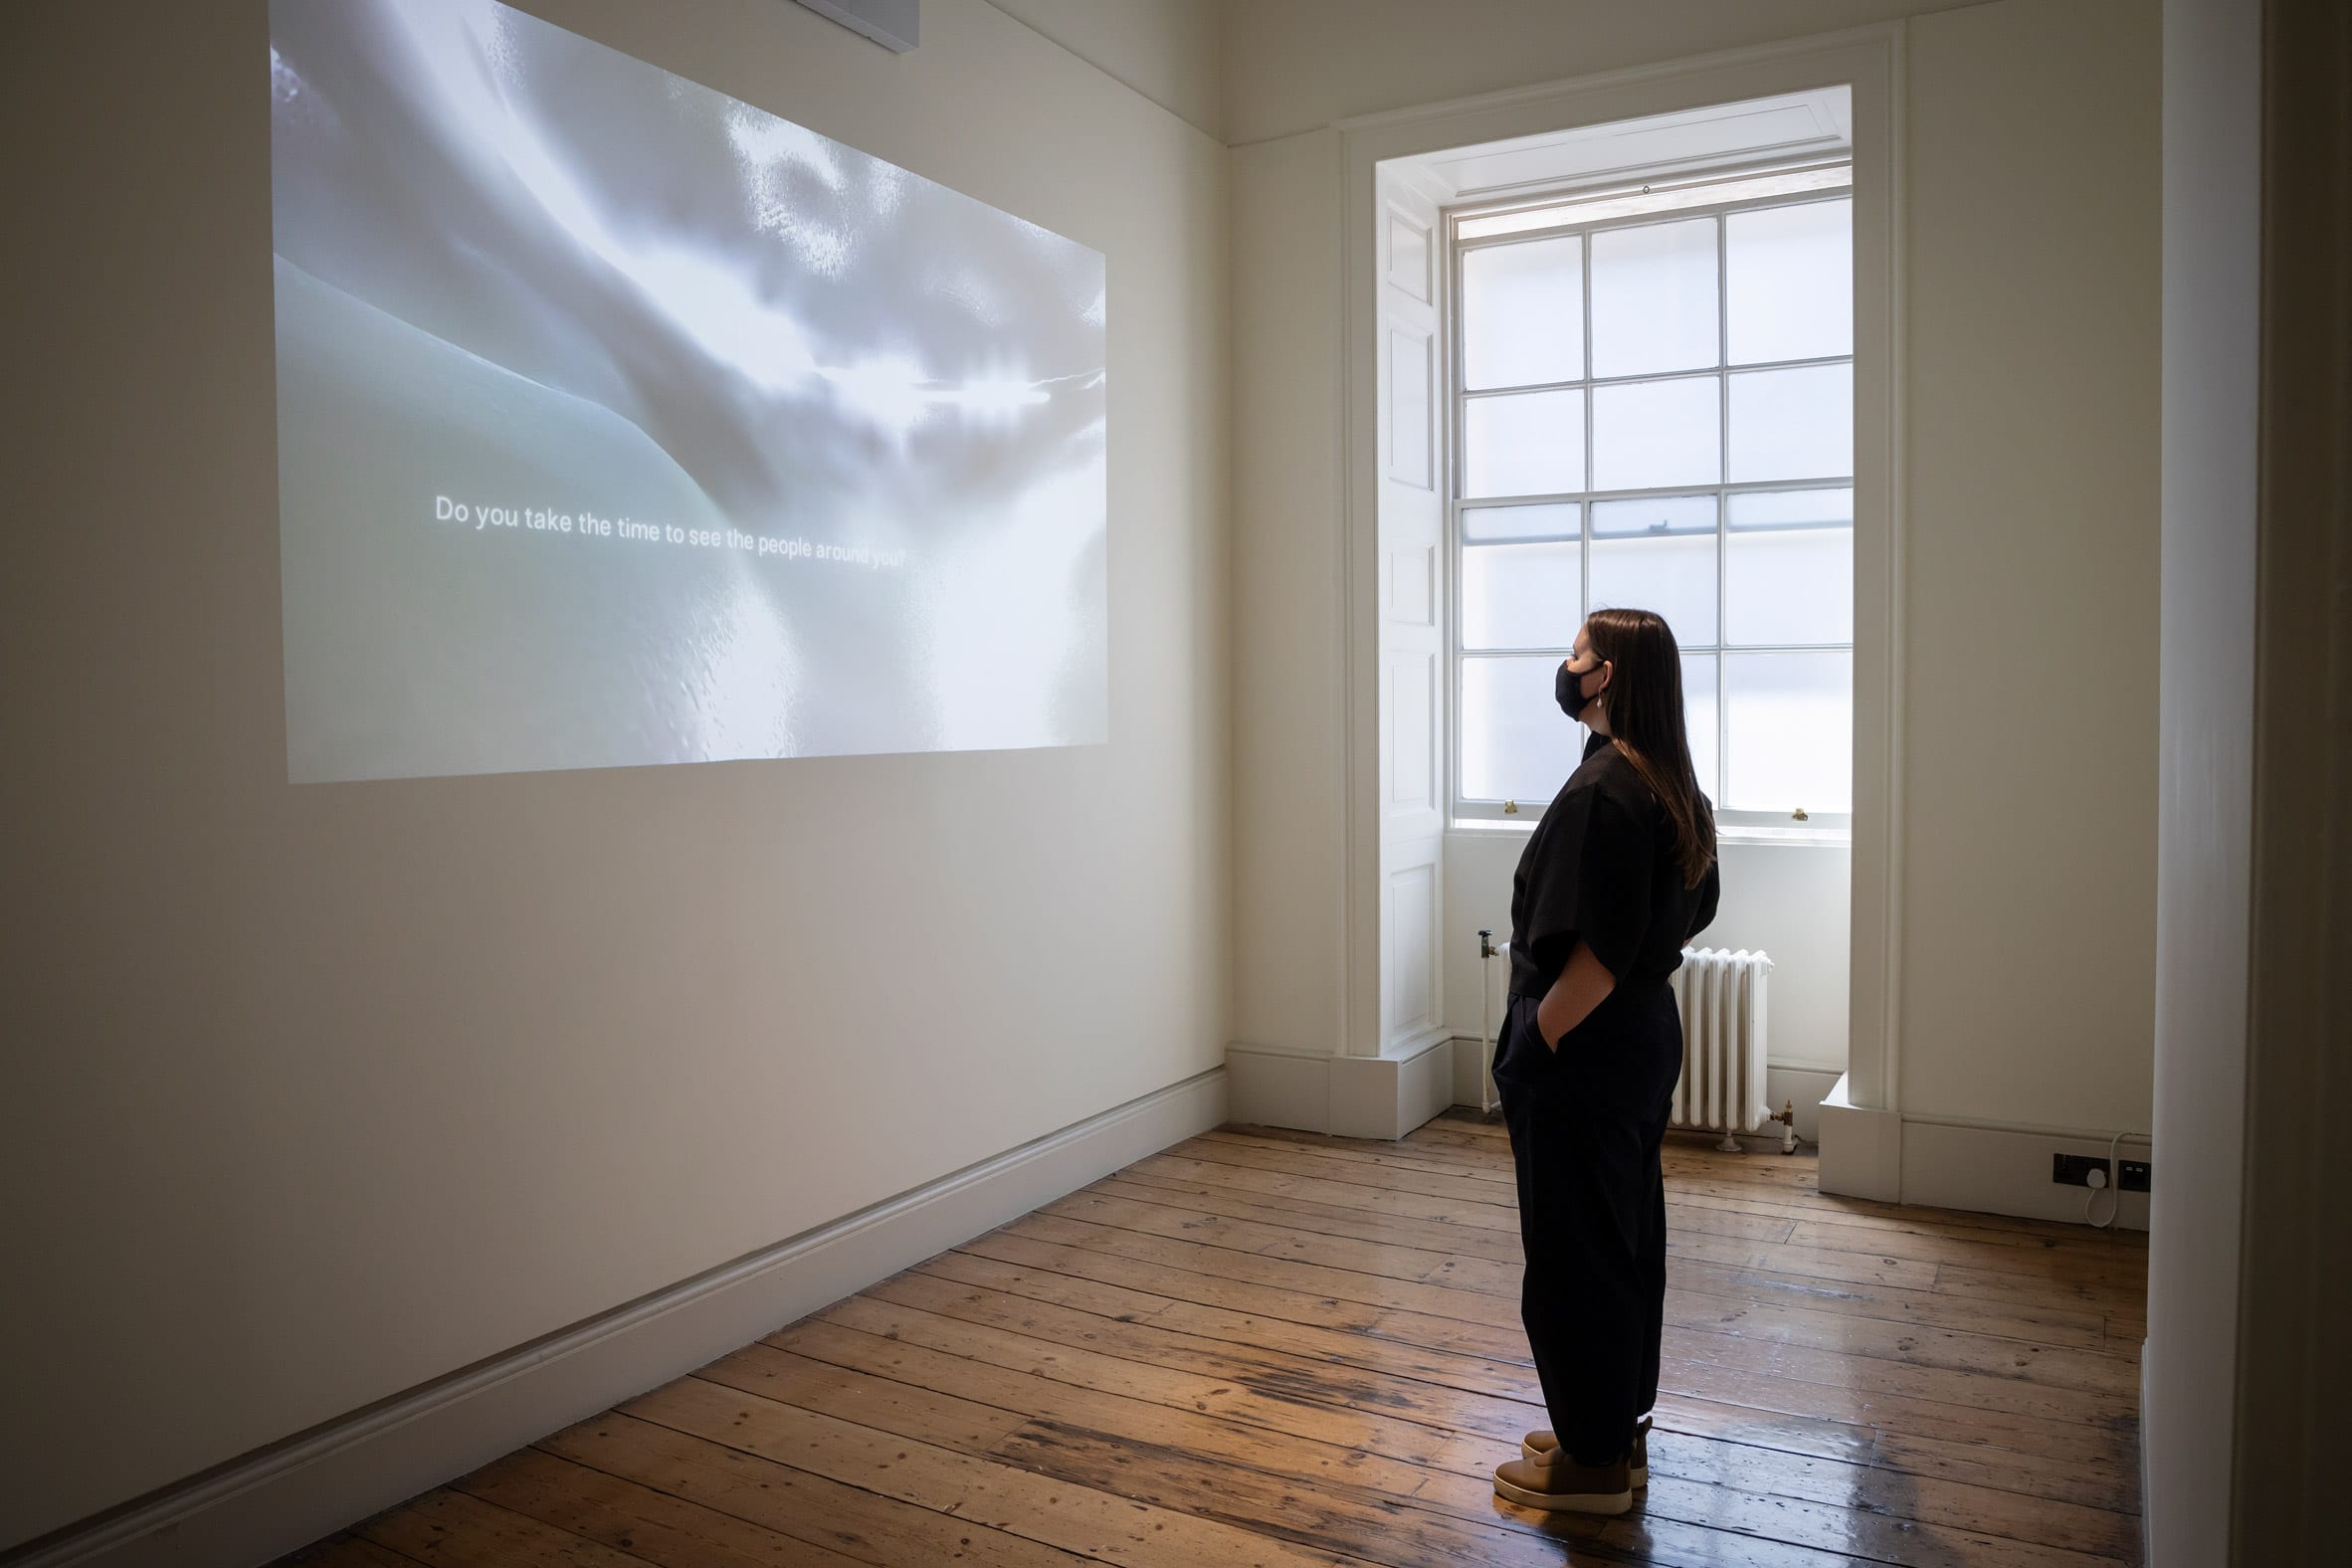 The artist is pictured watching a projection on a wall